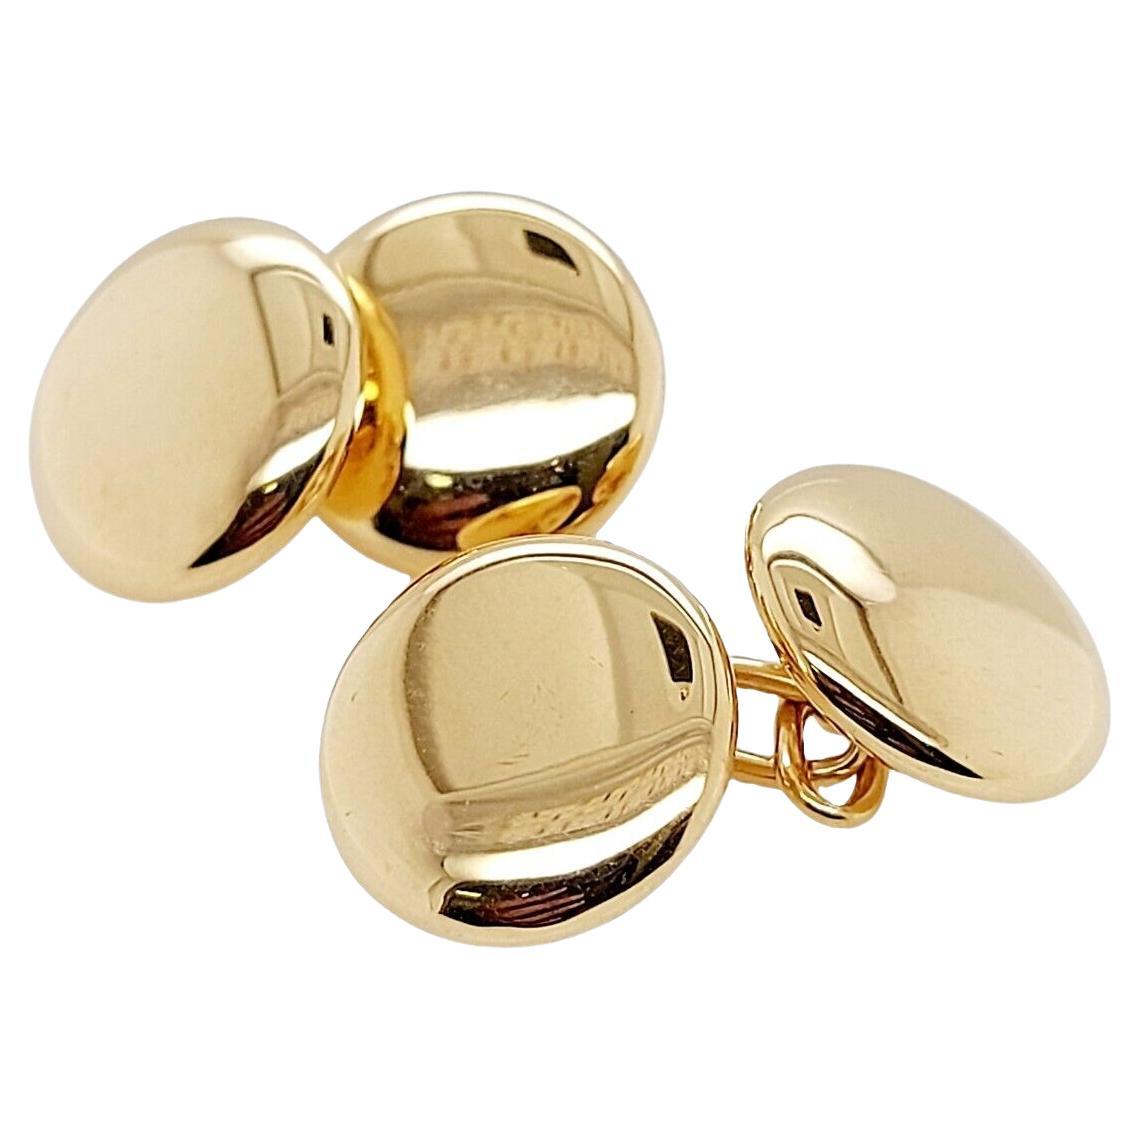 Vintage 18ct Yellow Gold Double Sided Circular Domed Cufflinks with Chain Link